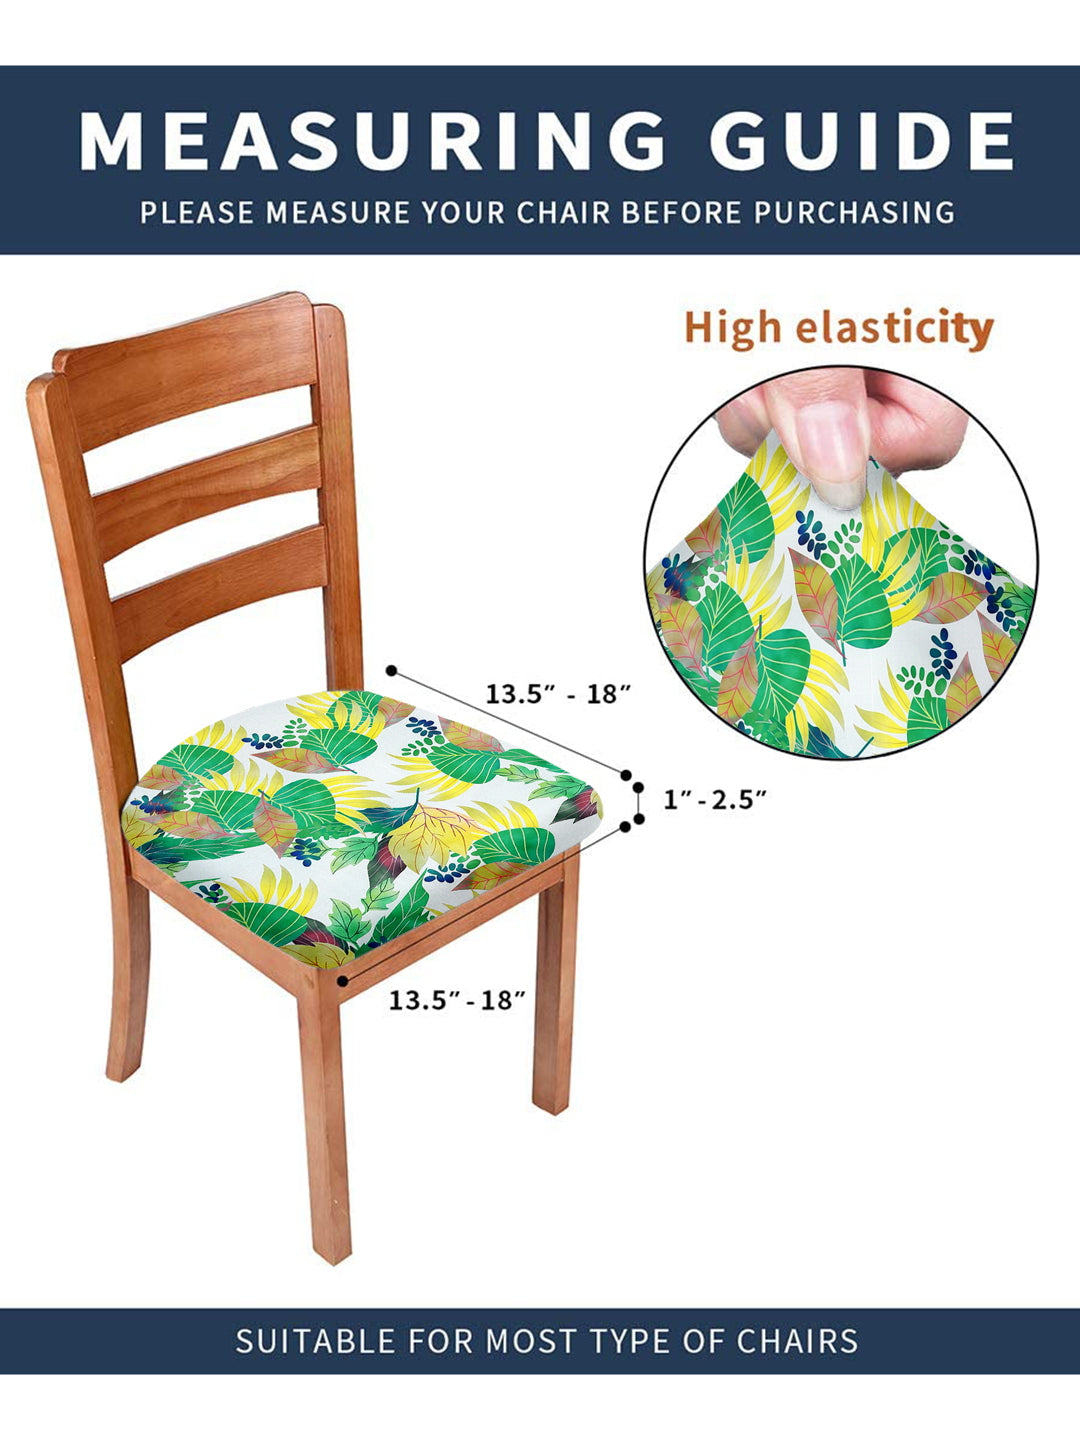 Stretchable Floral Printed Non Slip Chair Pad Cover Pack of 1- Green